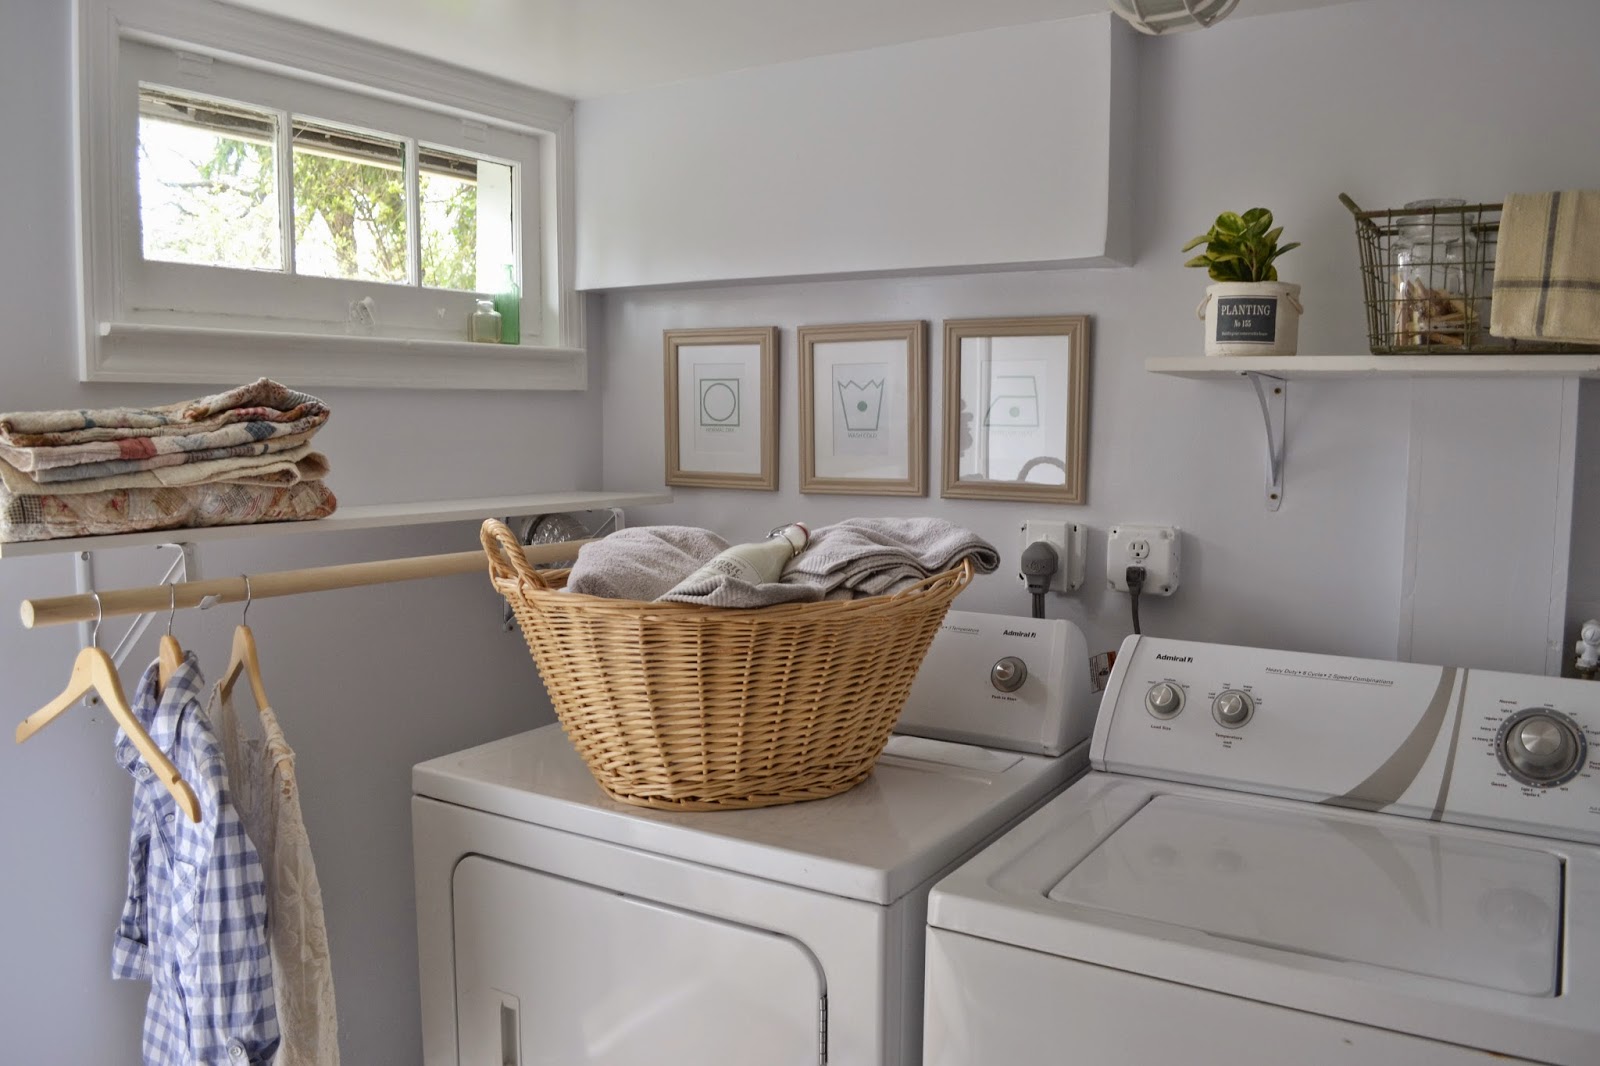 Attic Lace: Laundry Room Reveal